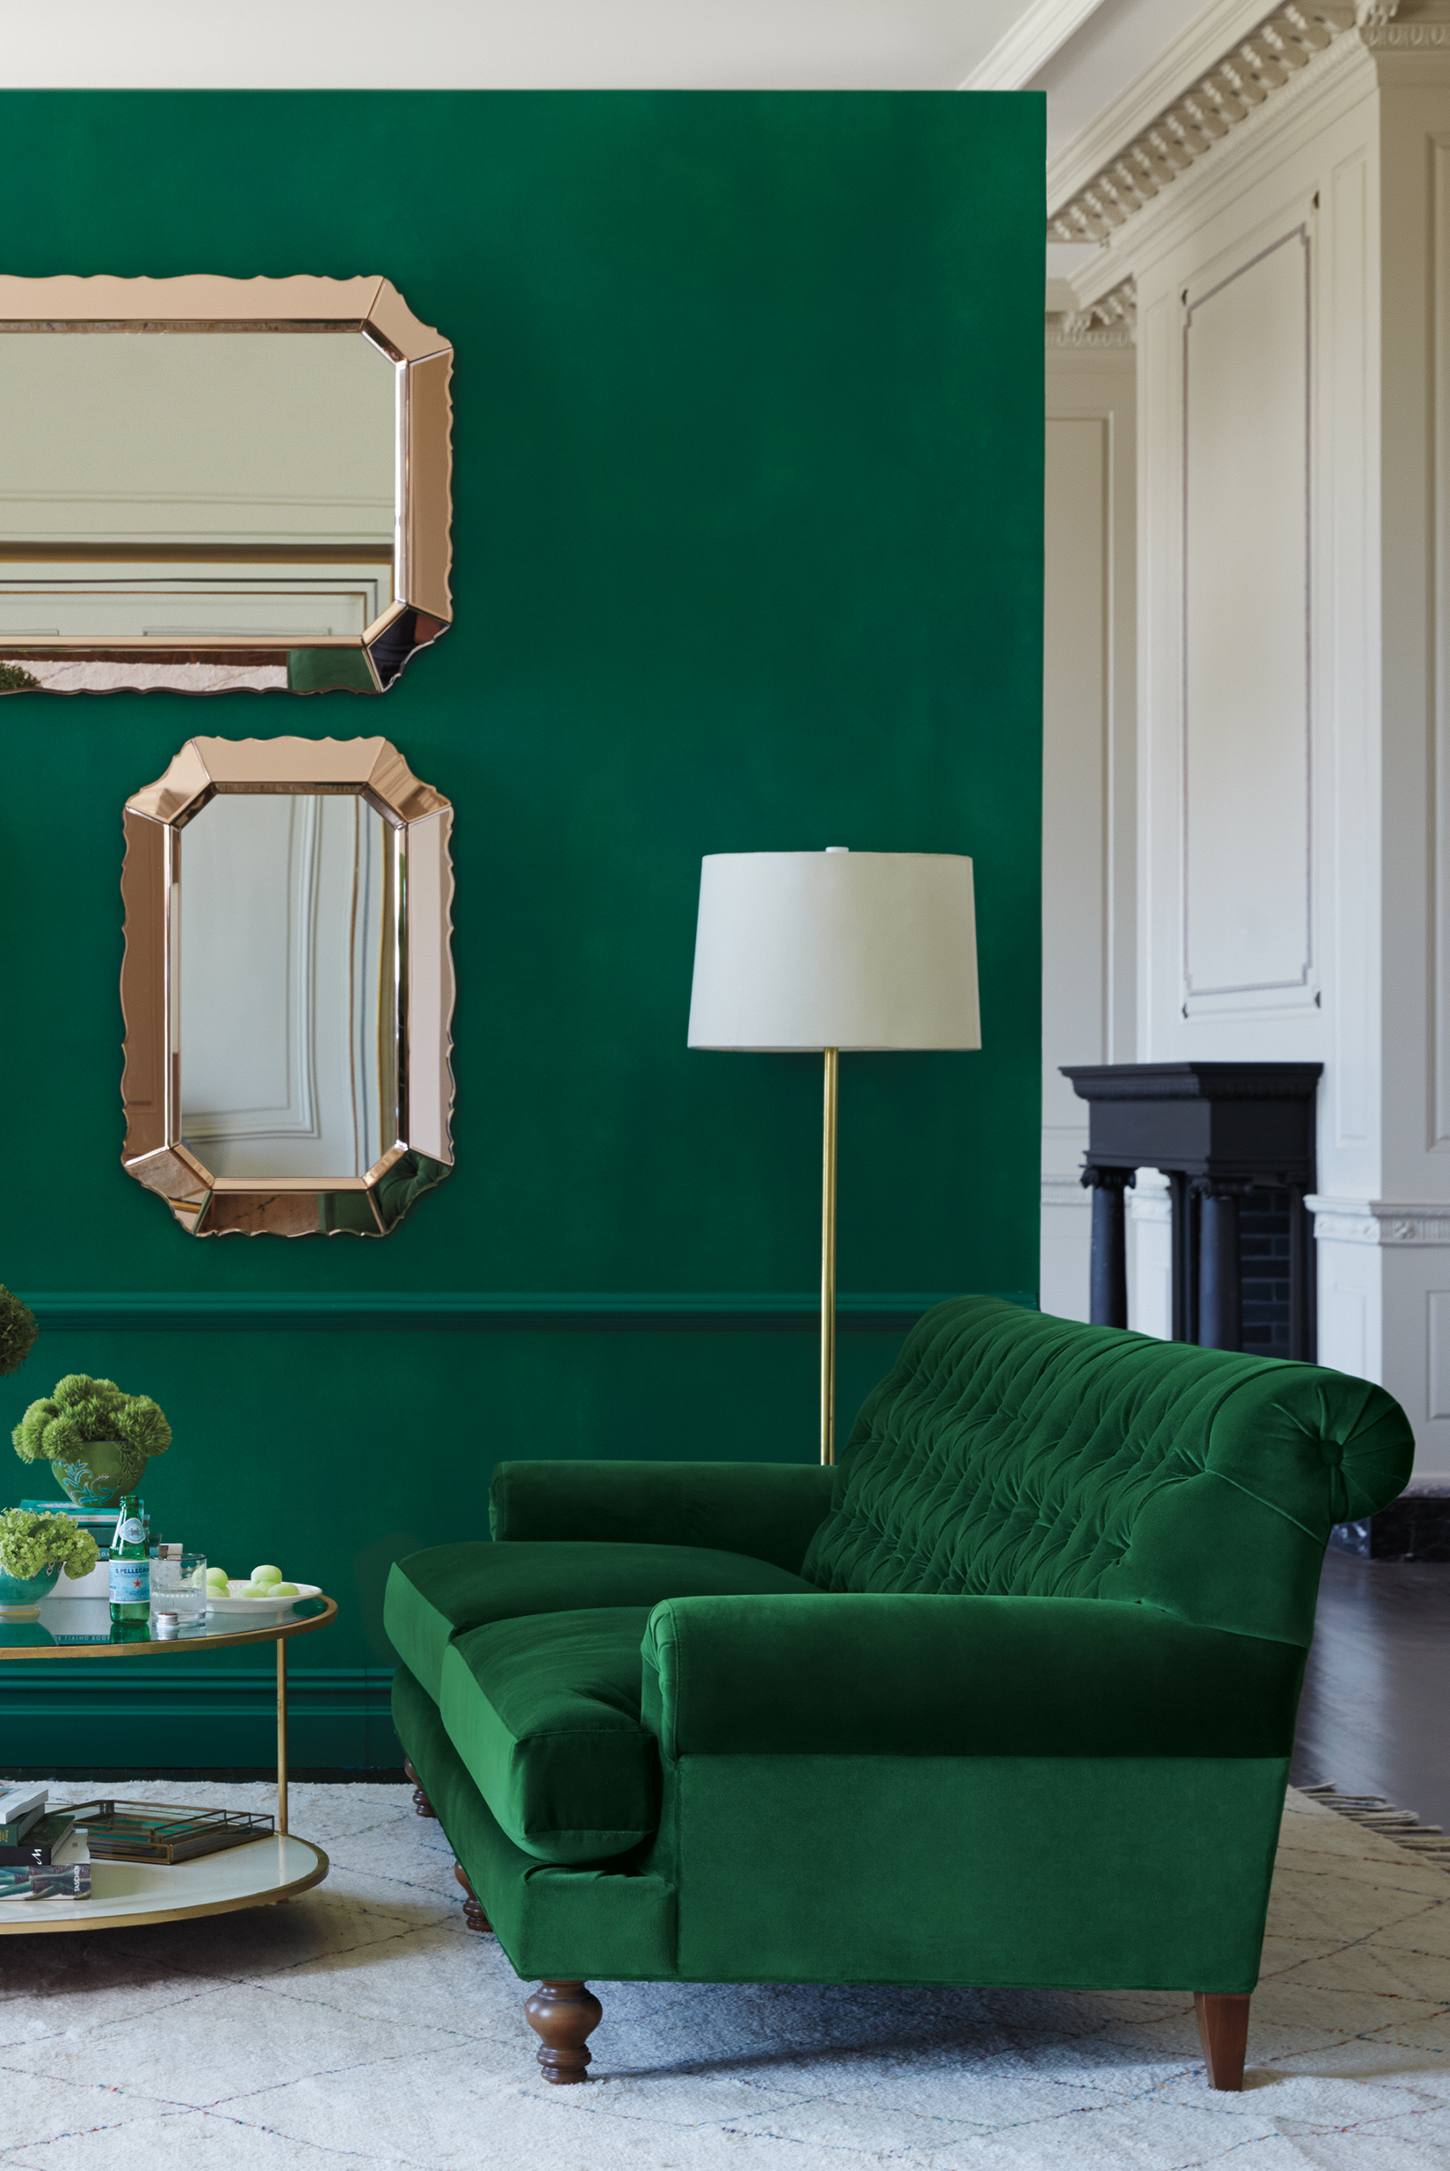 Gallery jewel tone interiors implement trend way right source tones is free HD wallpaper.